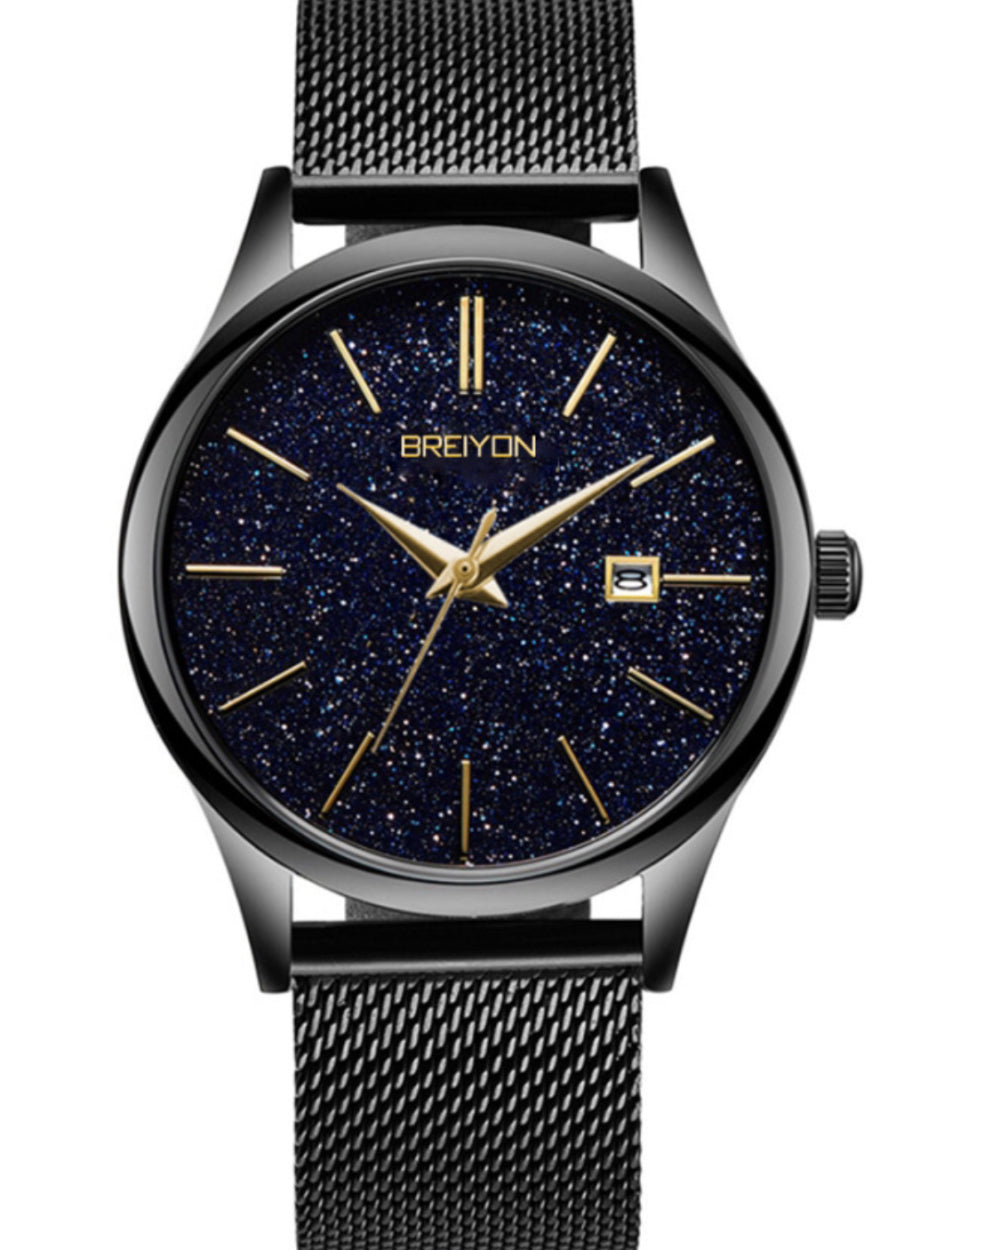 Limited Edition BreiYon Watch 50% off at checkout (The Rich Aisle)